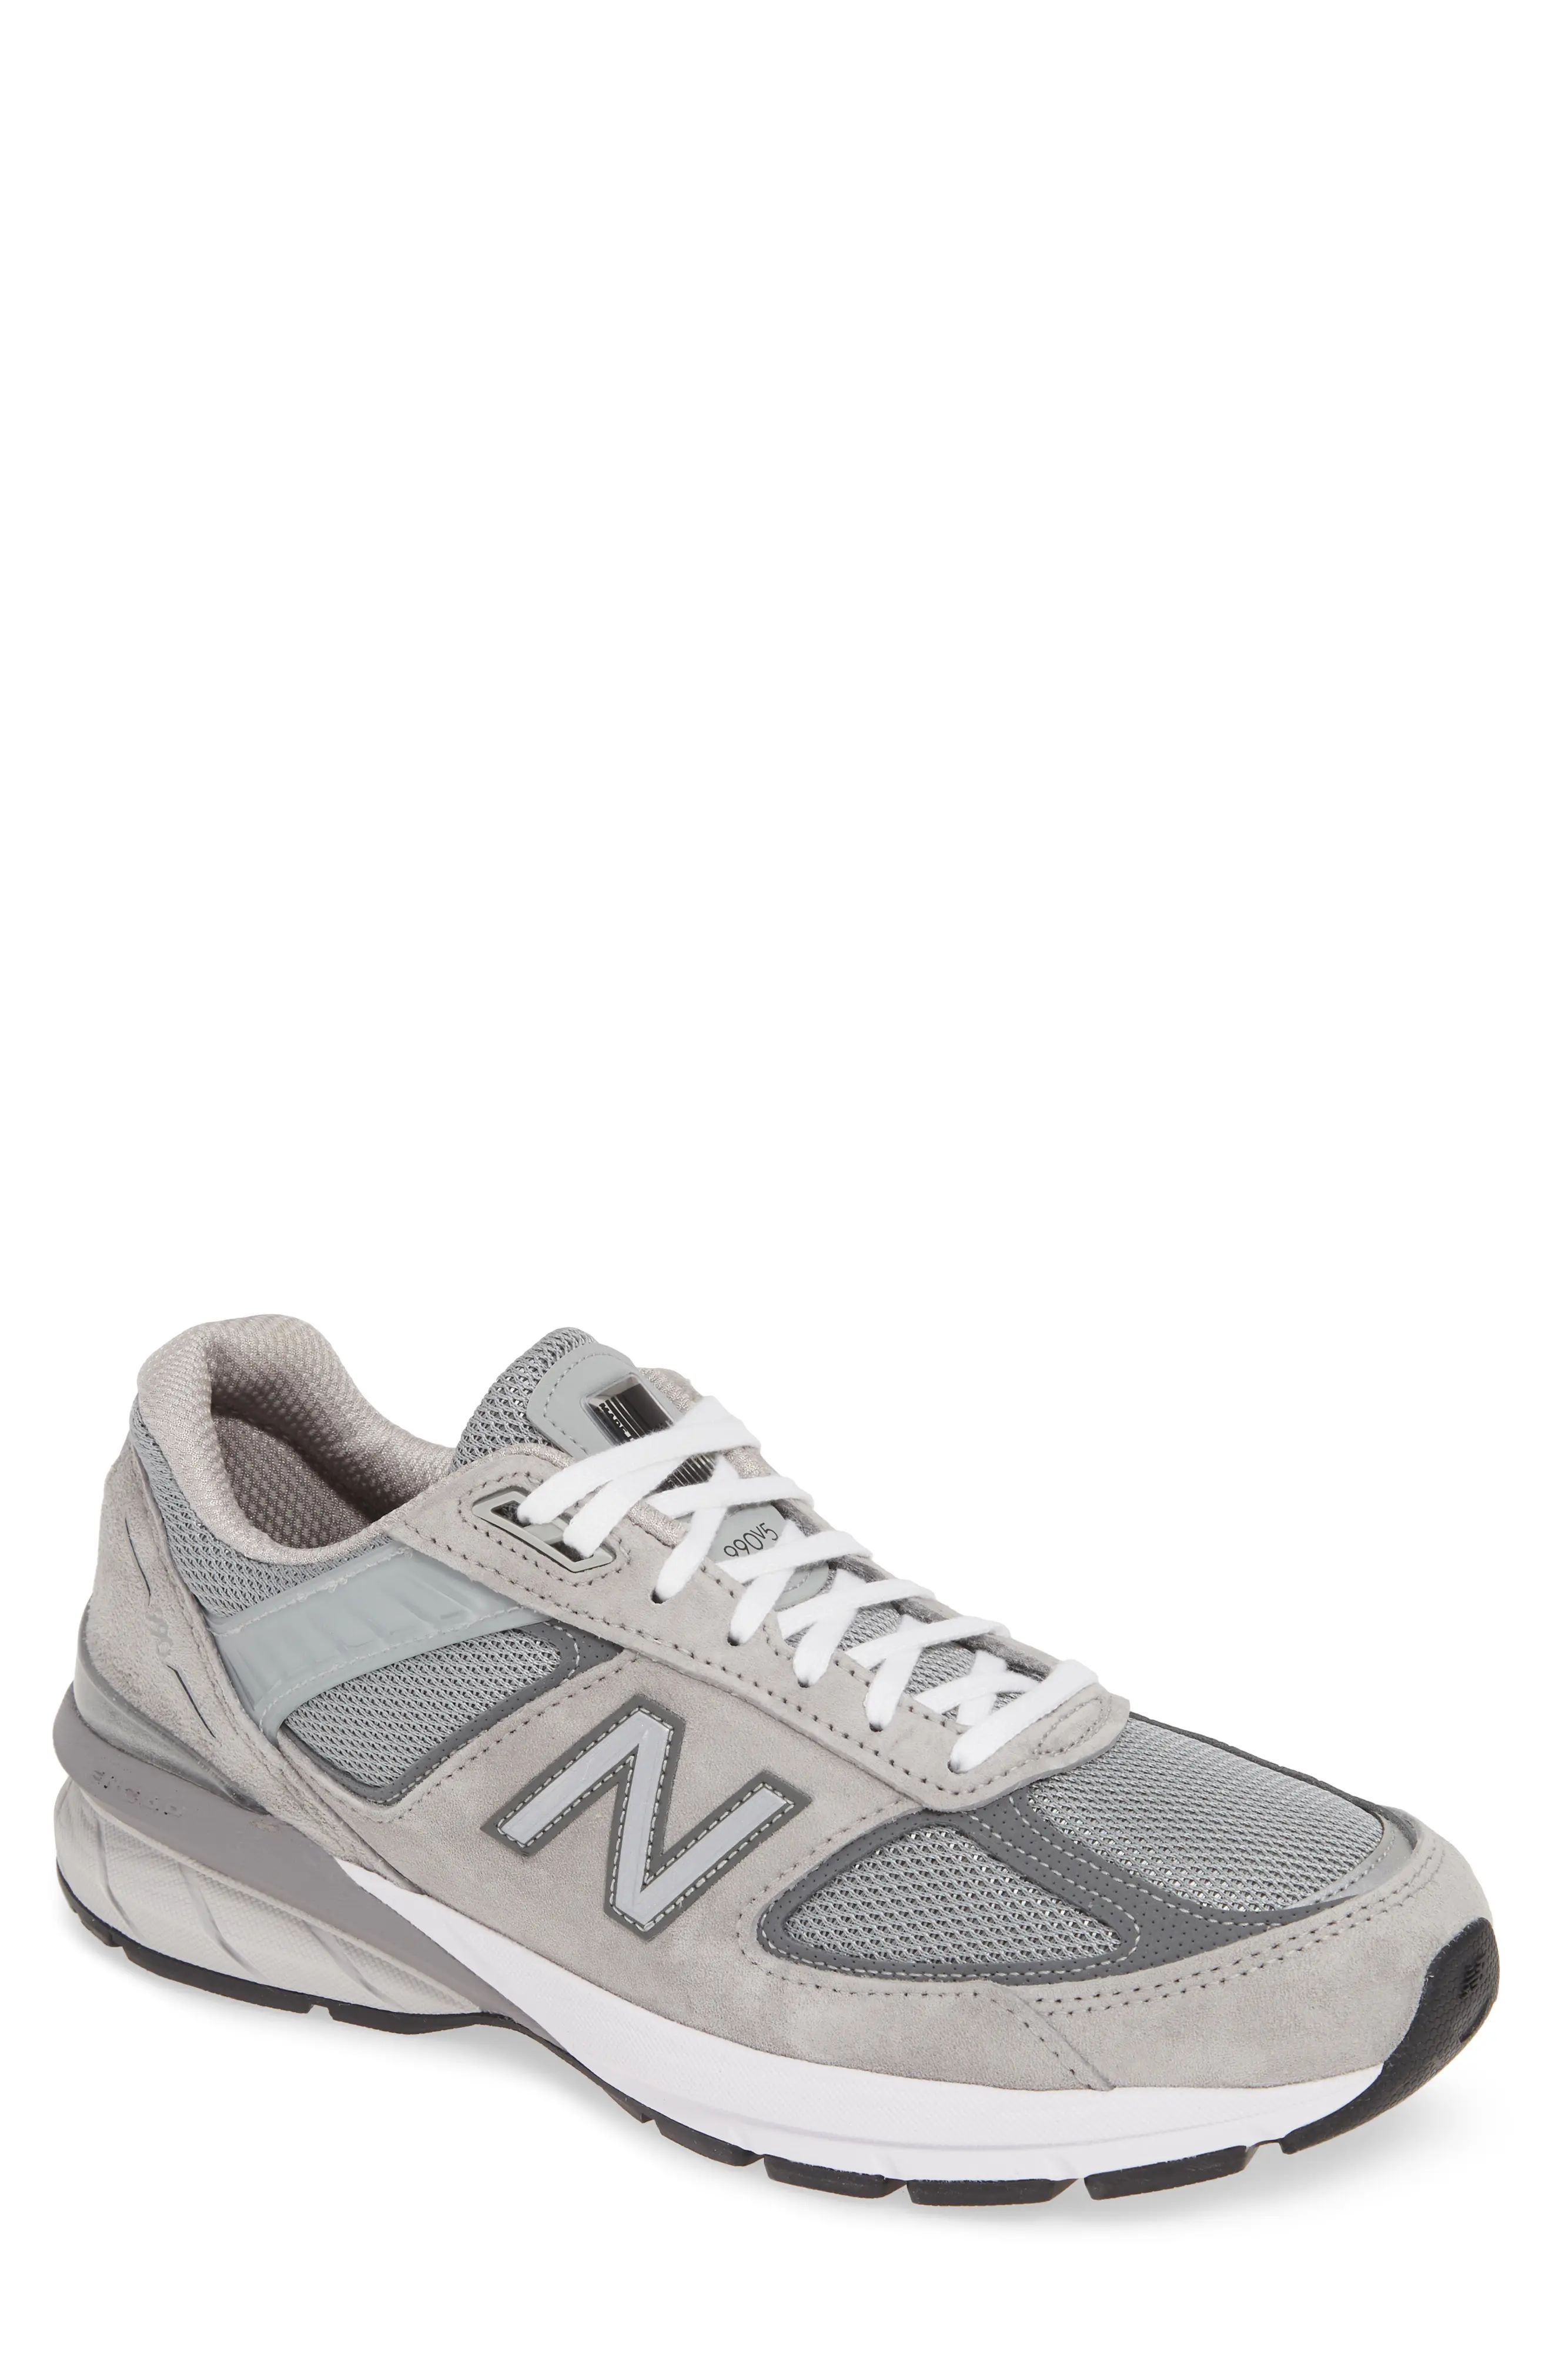 New Balance 990 v5 Made in US Running Shoe in Cool Grey at Nordstrom, Size 7 | Nordstrom